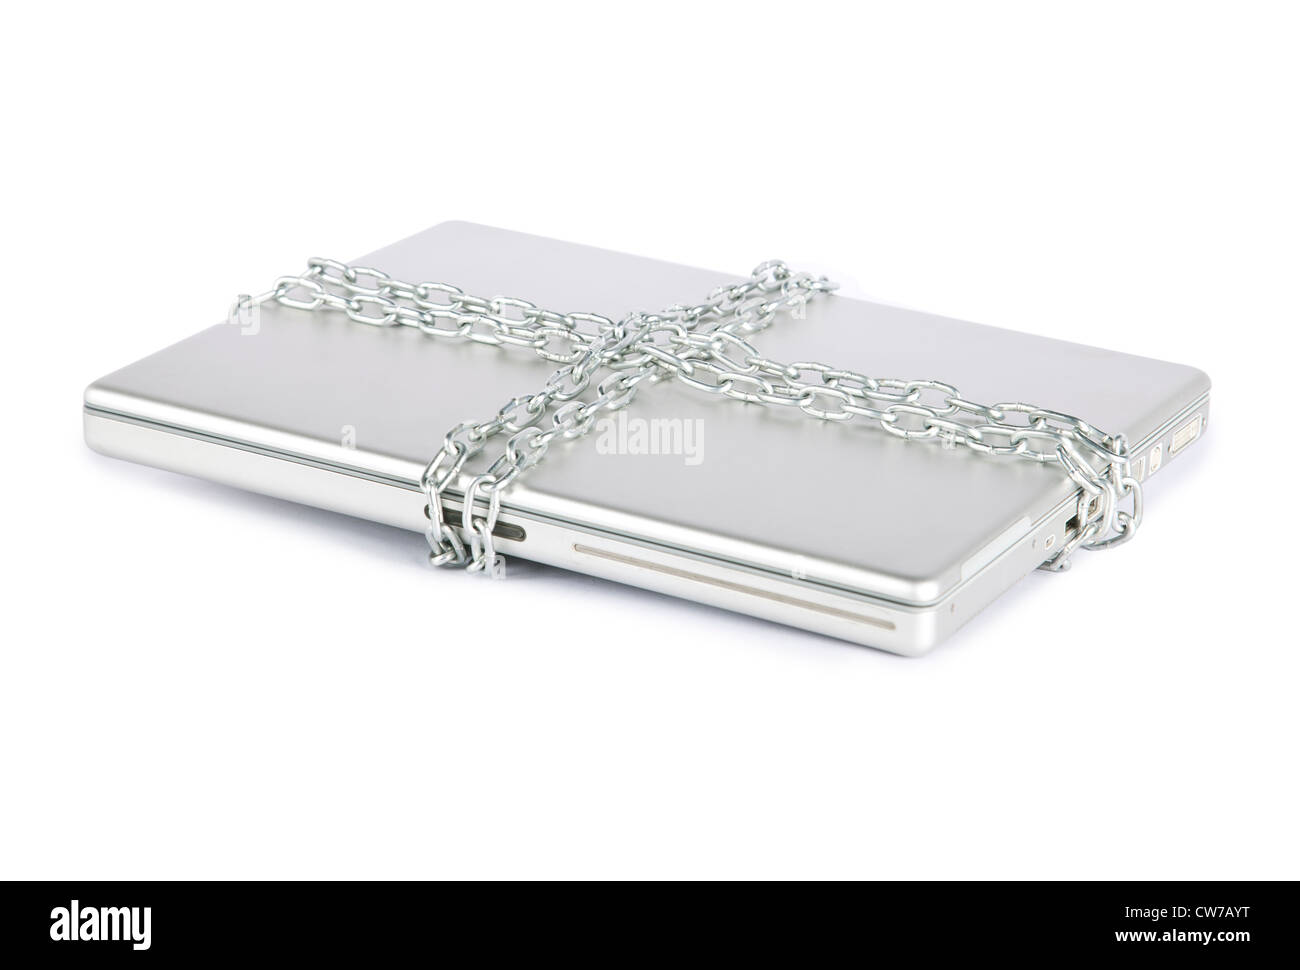 Computer security concept with laptop and chain Stock Photo